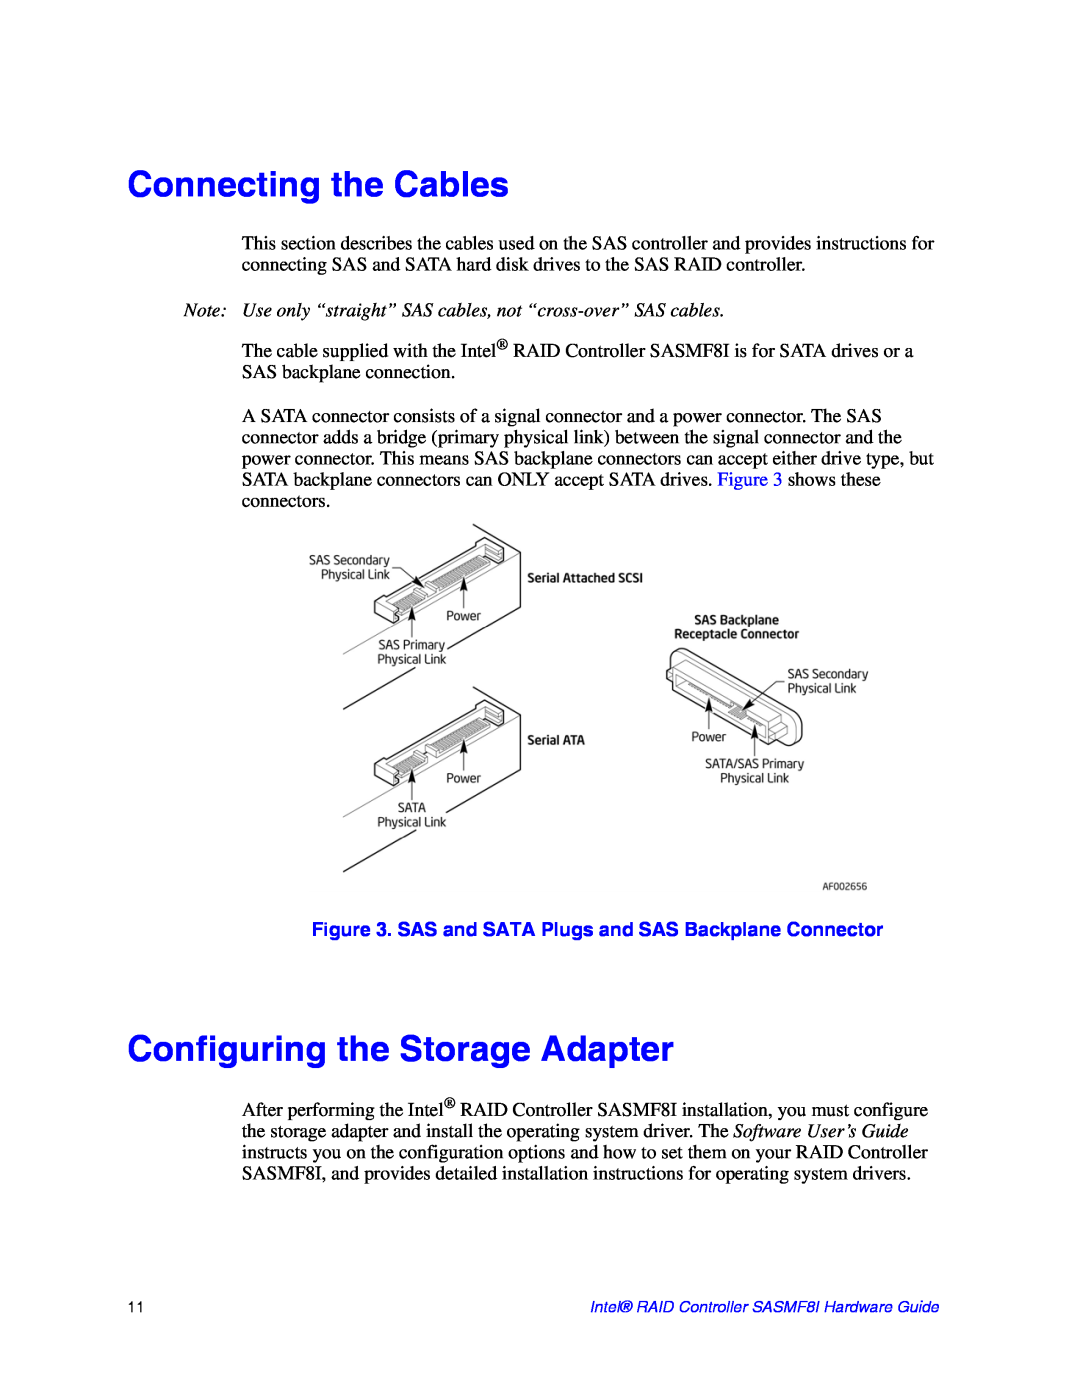 Intel SASMF8I manual Connecting the Cables, Configuring the Storage Adapter 